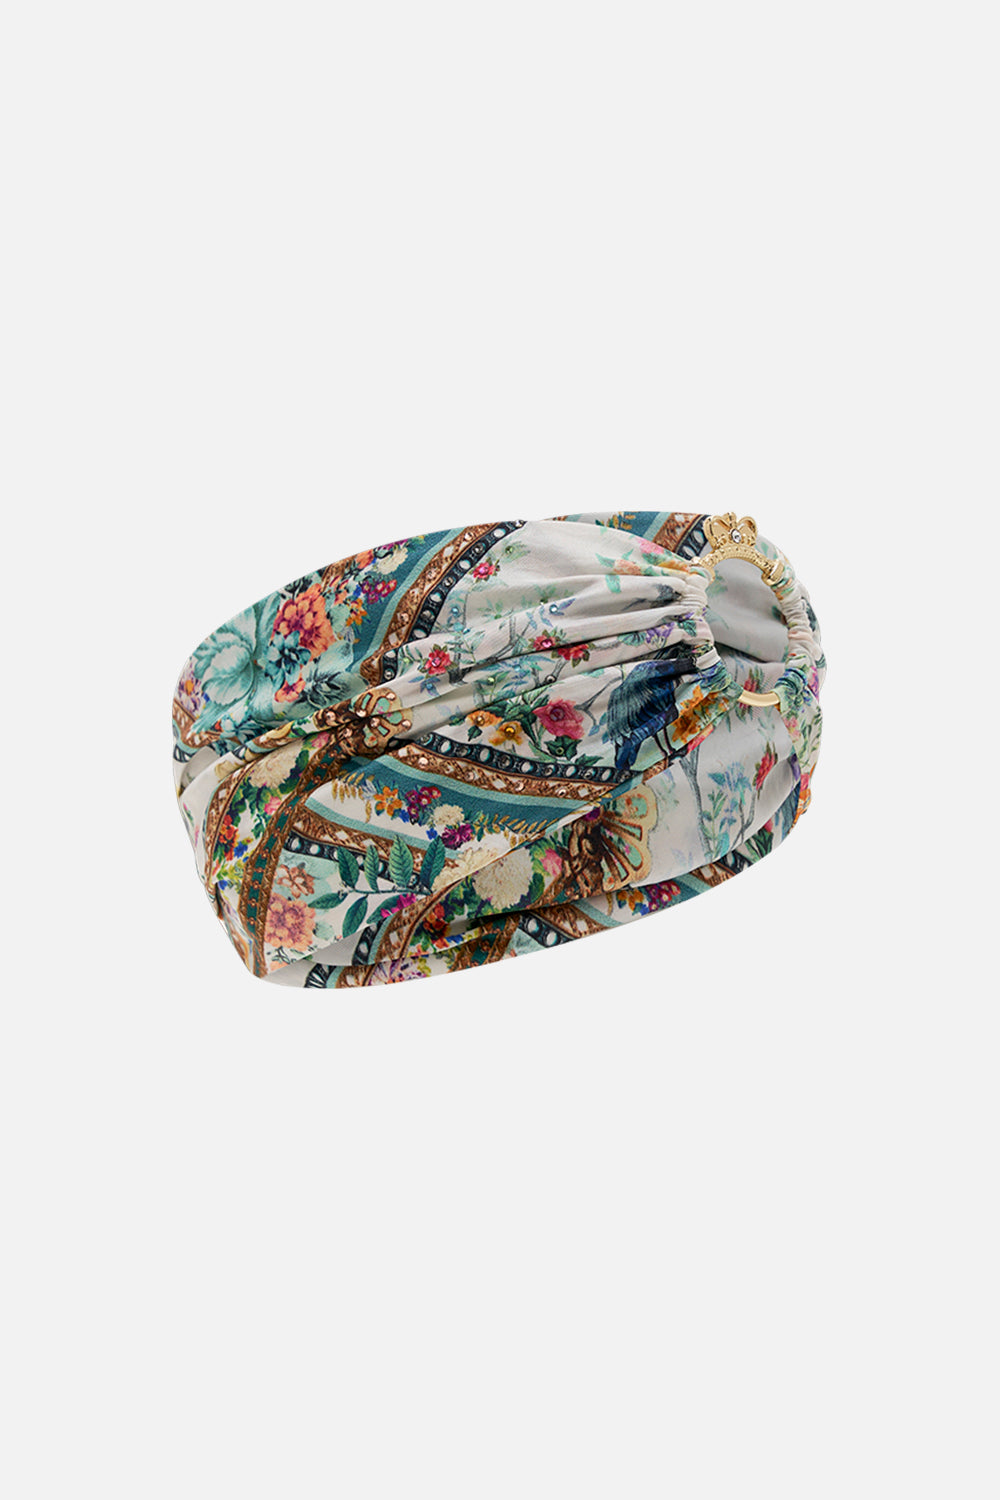 CAMILLA silk headband in Plumes and Parterres print